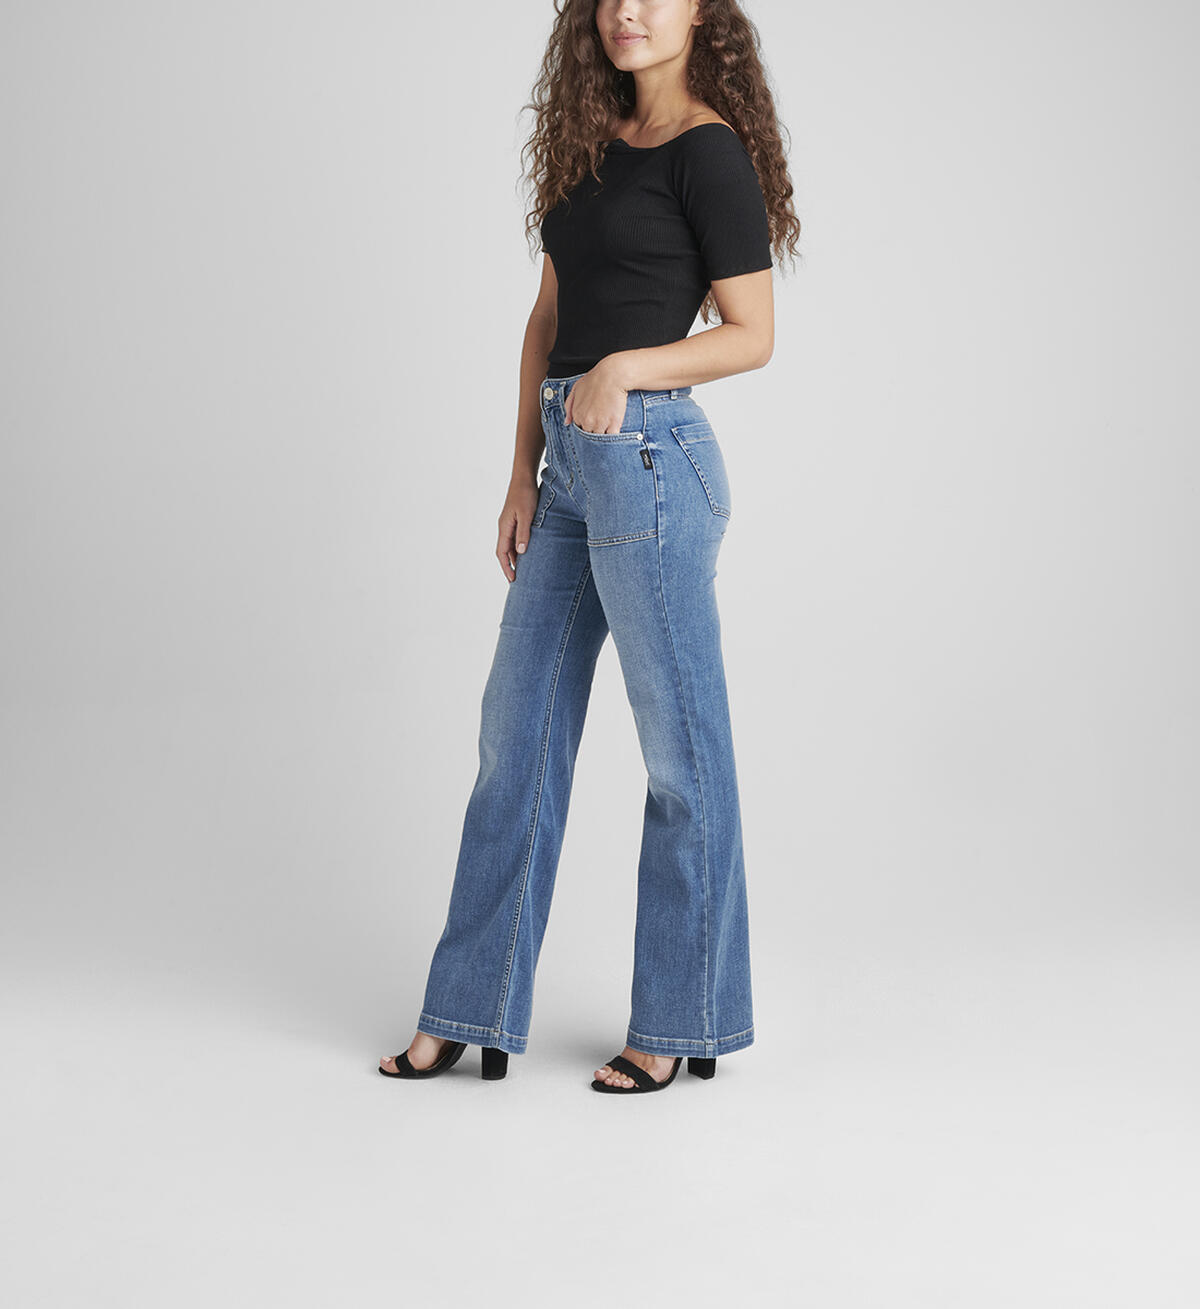 Avery High Rise Trouser Leg Jeans, , hi-res image number 2